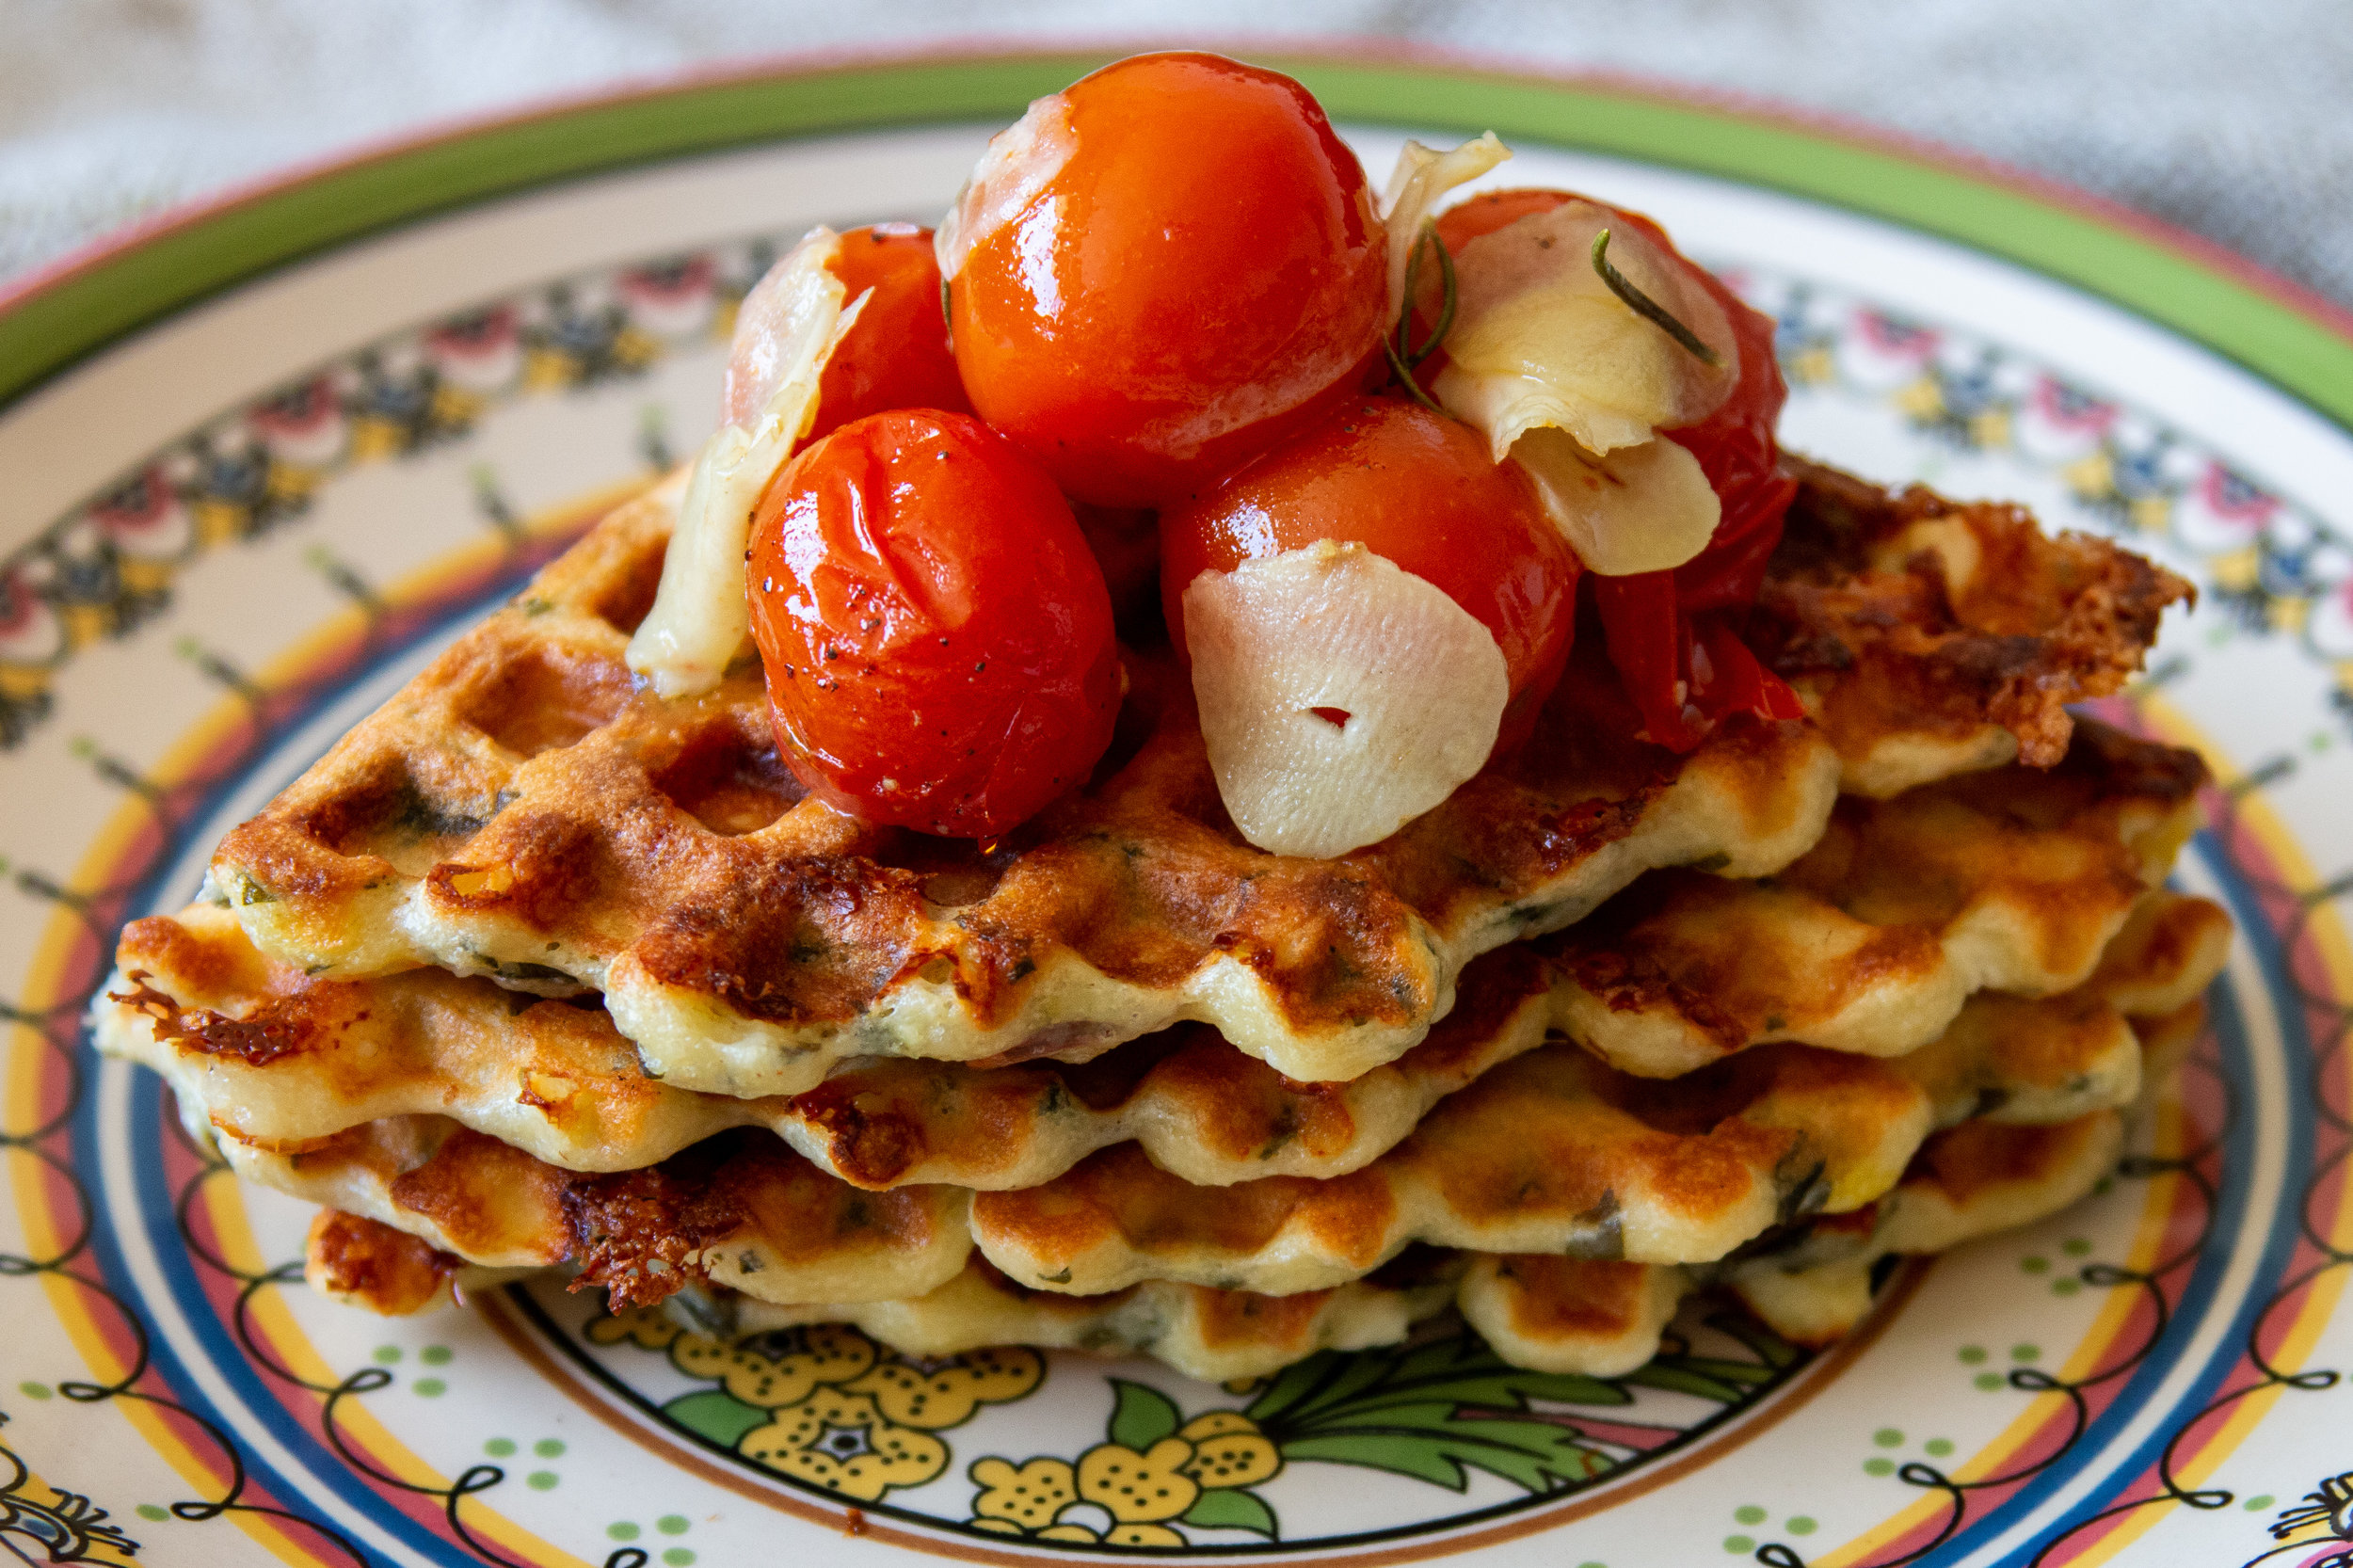  Savoury Waffles With Cherry Tomatoes 